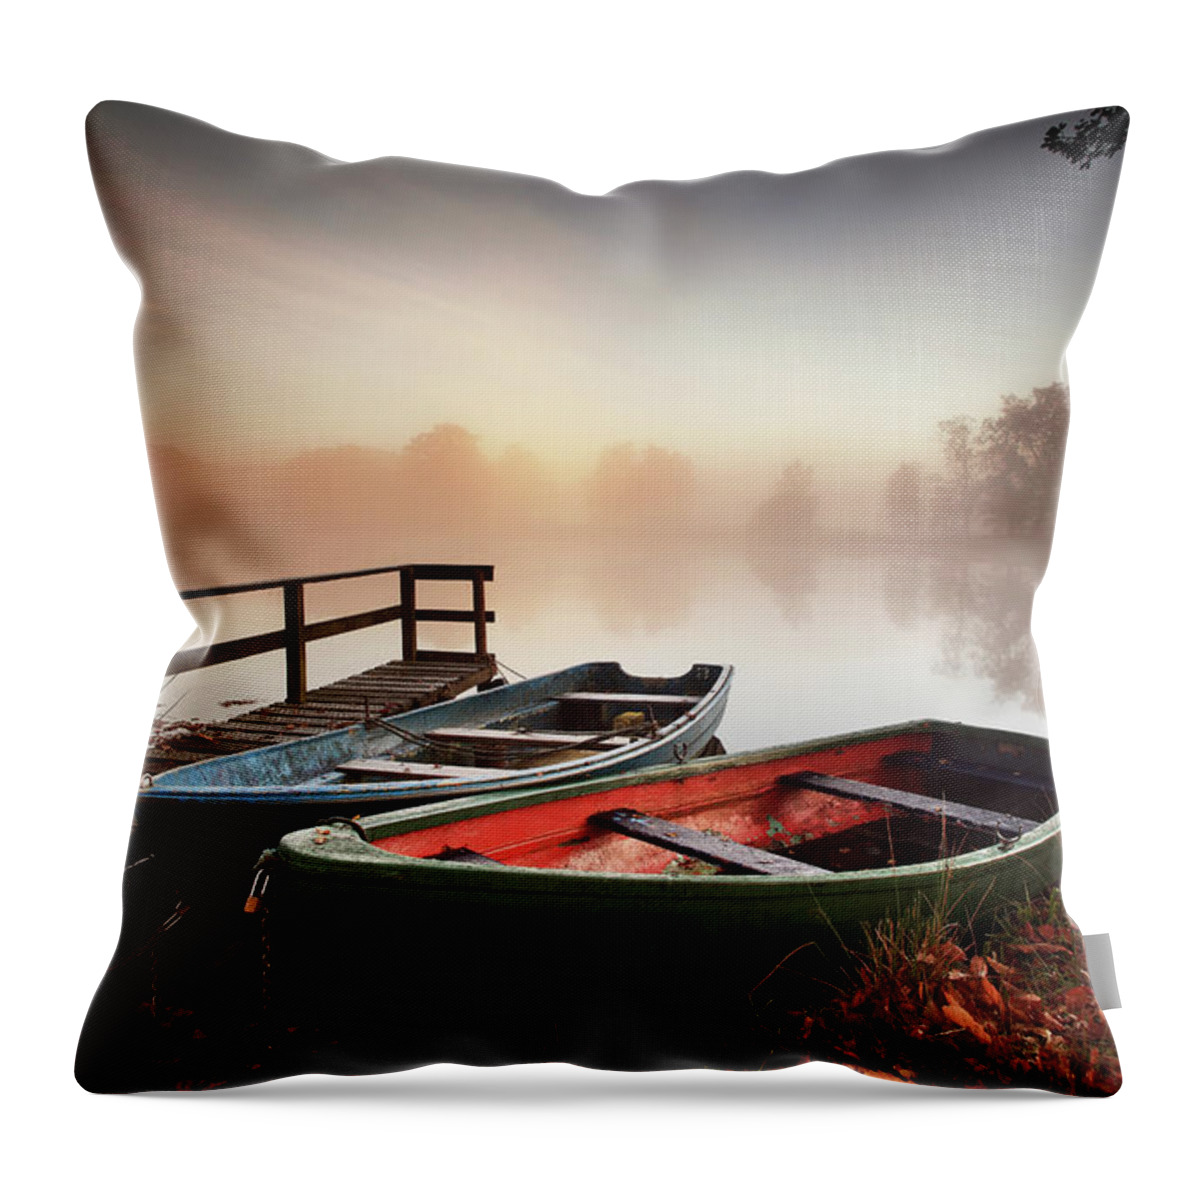 Dawn Throw Pillow featuring the photograph Rowing Boats Moored On Banks Of Wooded by Angus Clyne